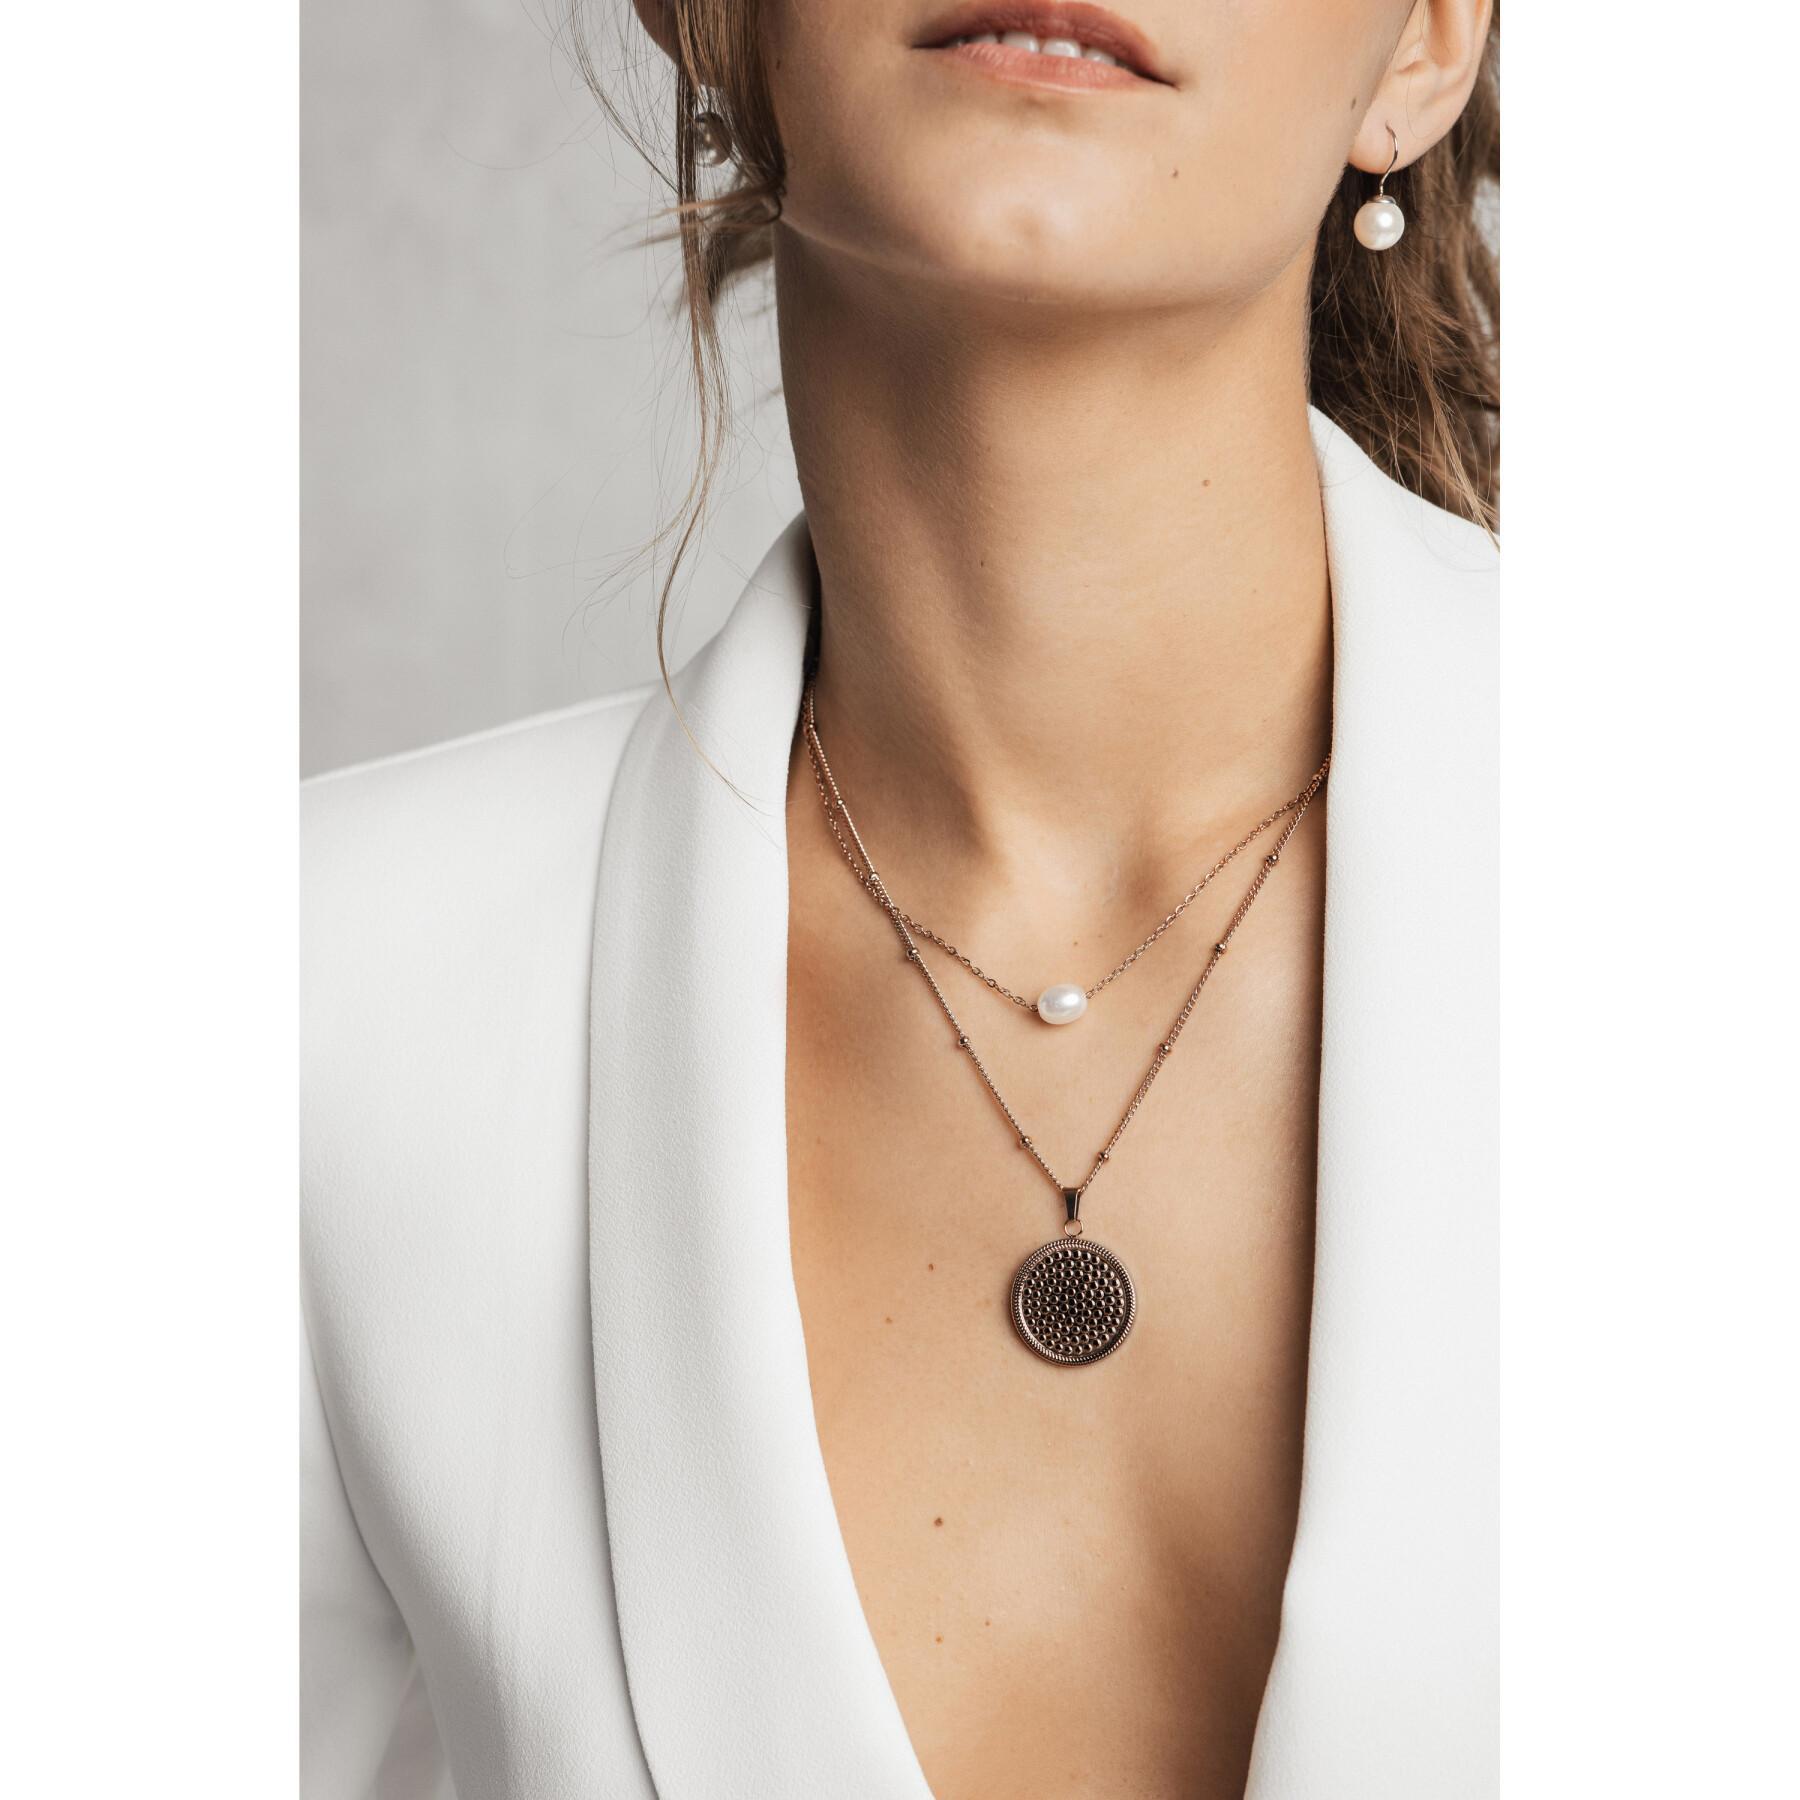 Women's necklace Isabella Ford Agathe